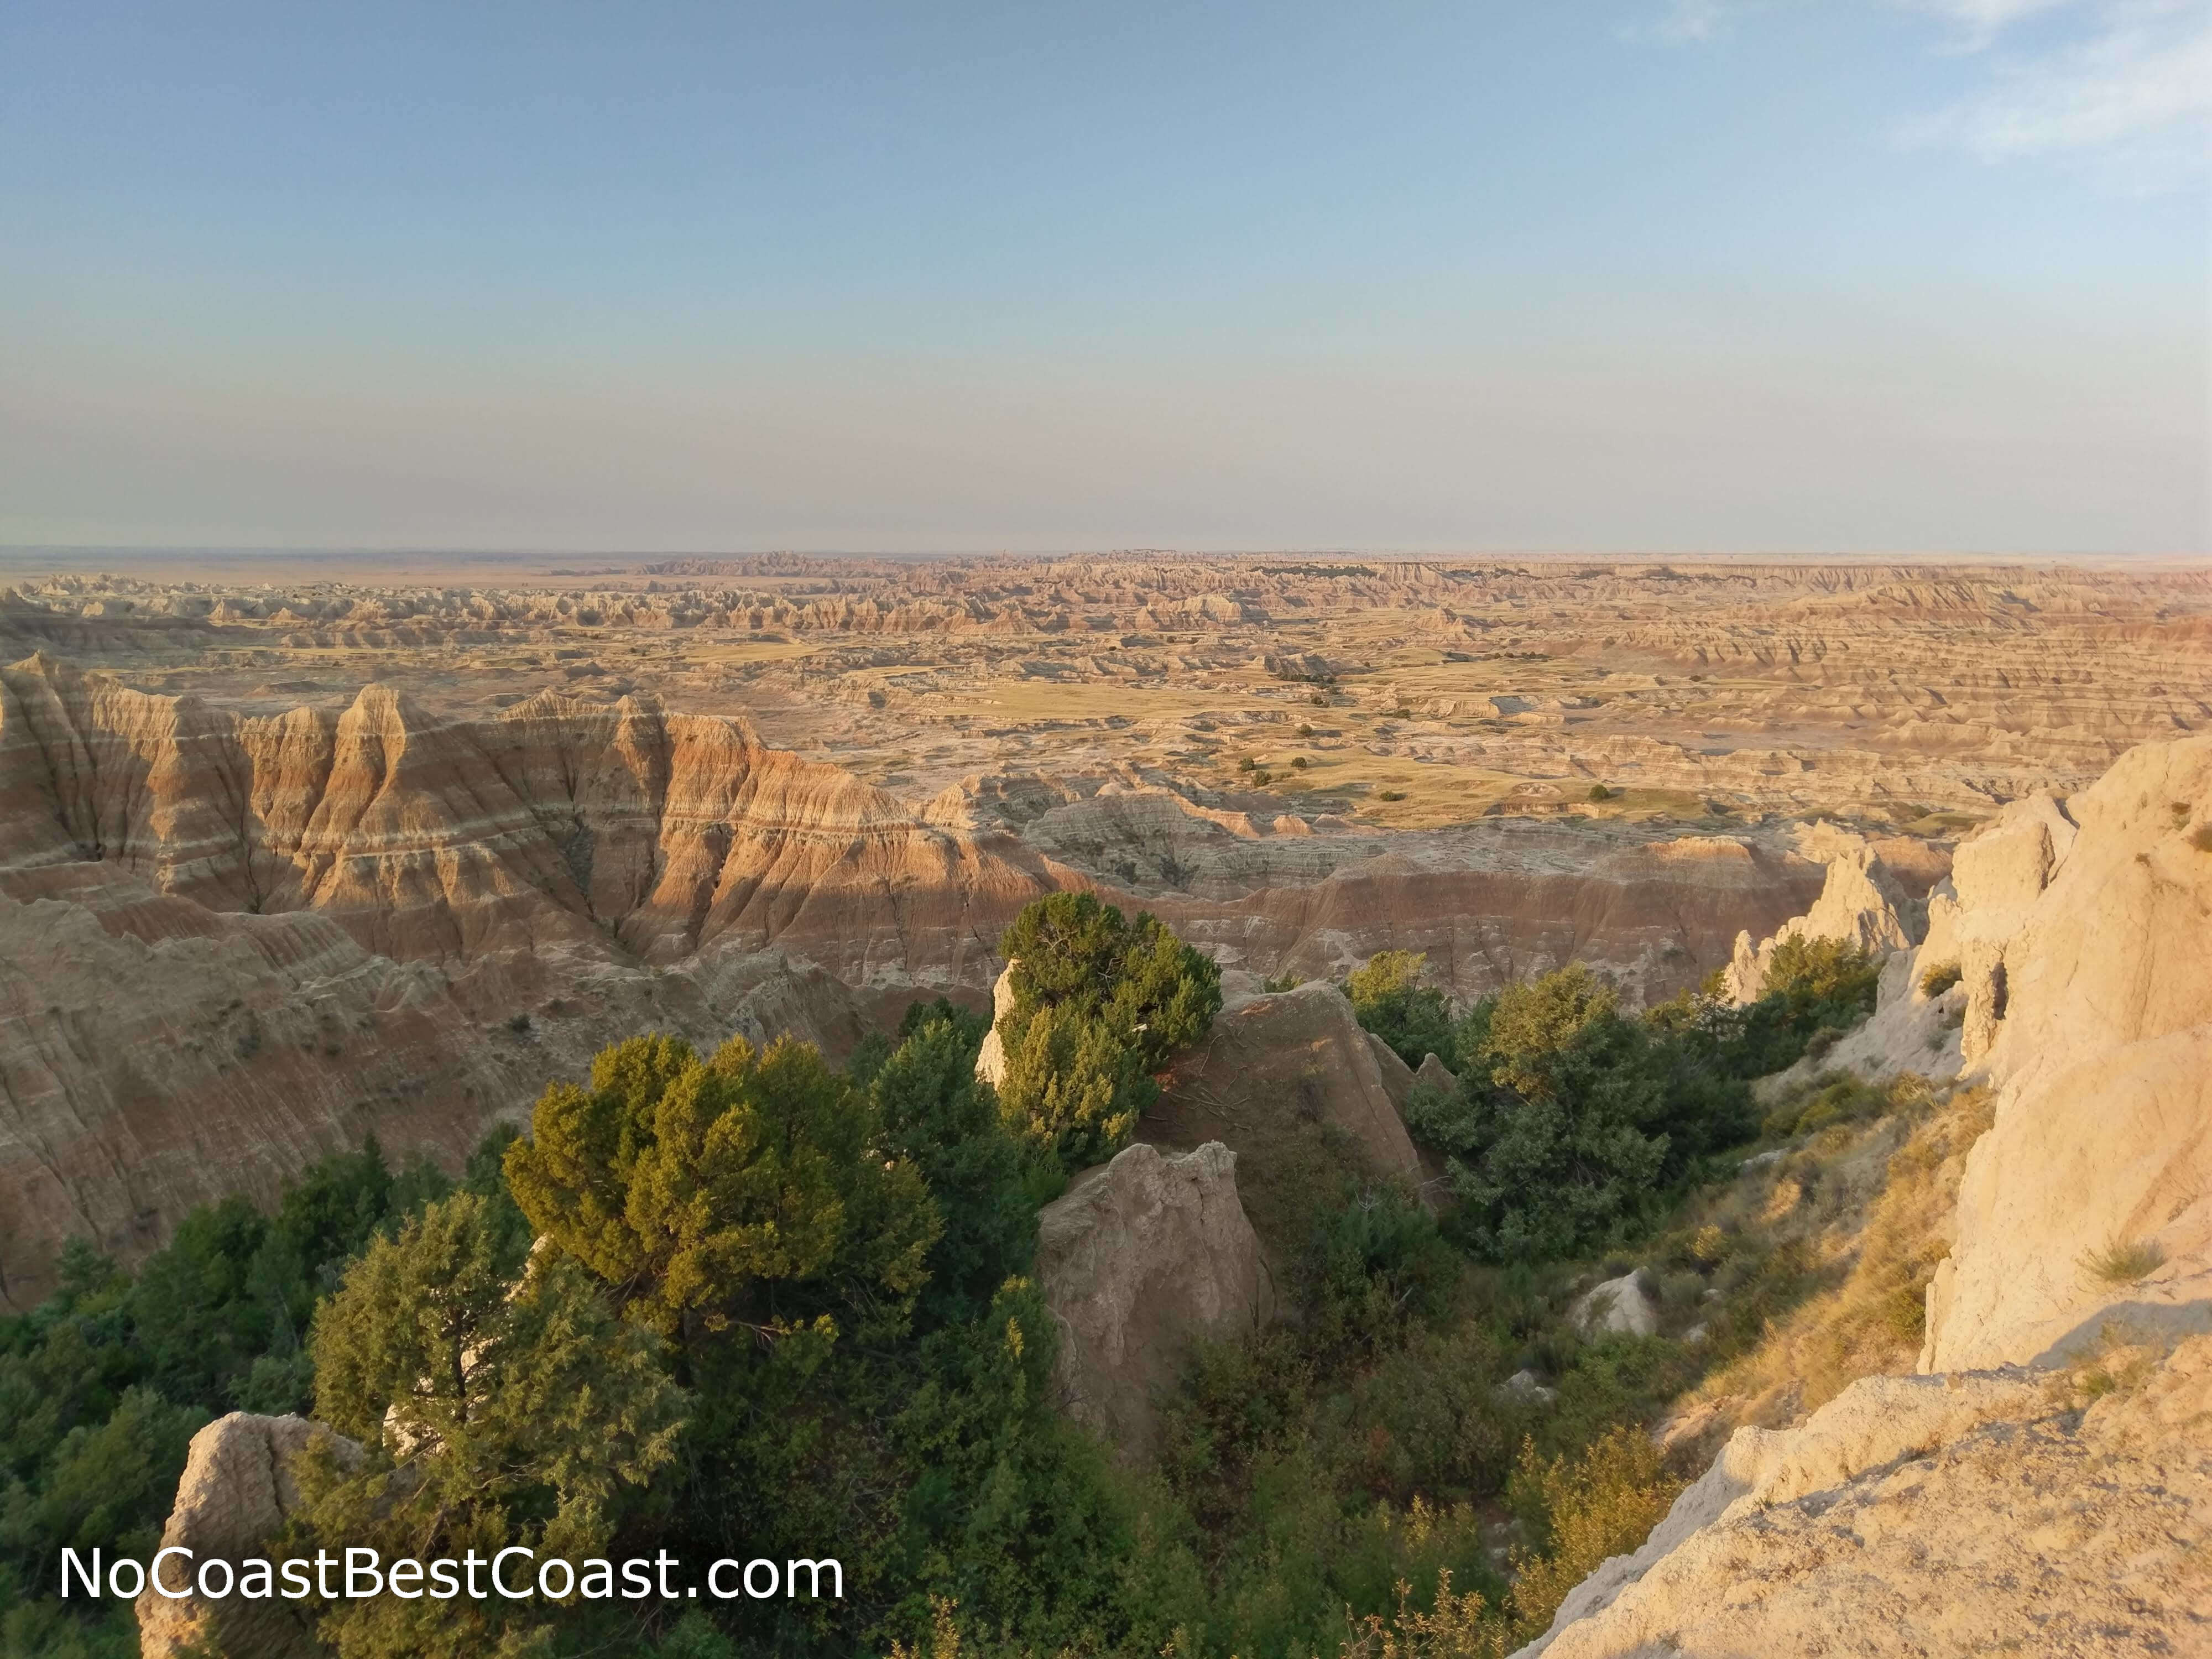 Trees and greenery growing in the shade of the badlands